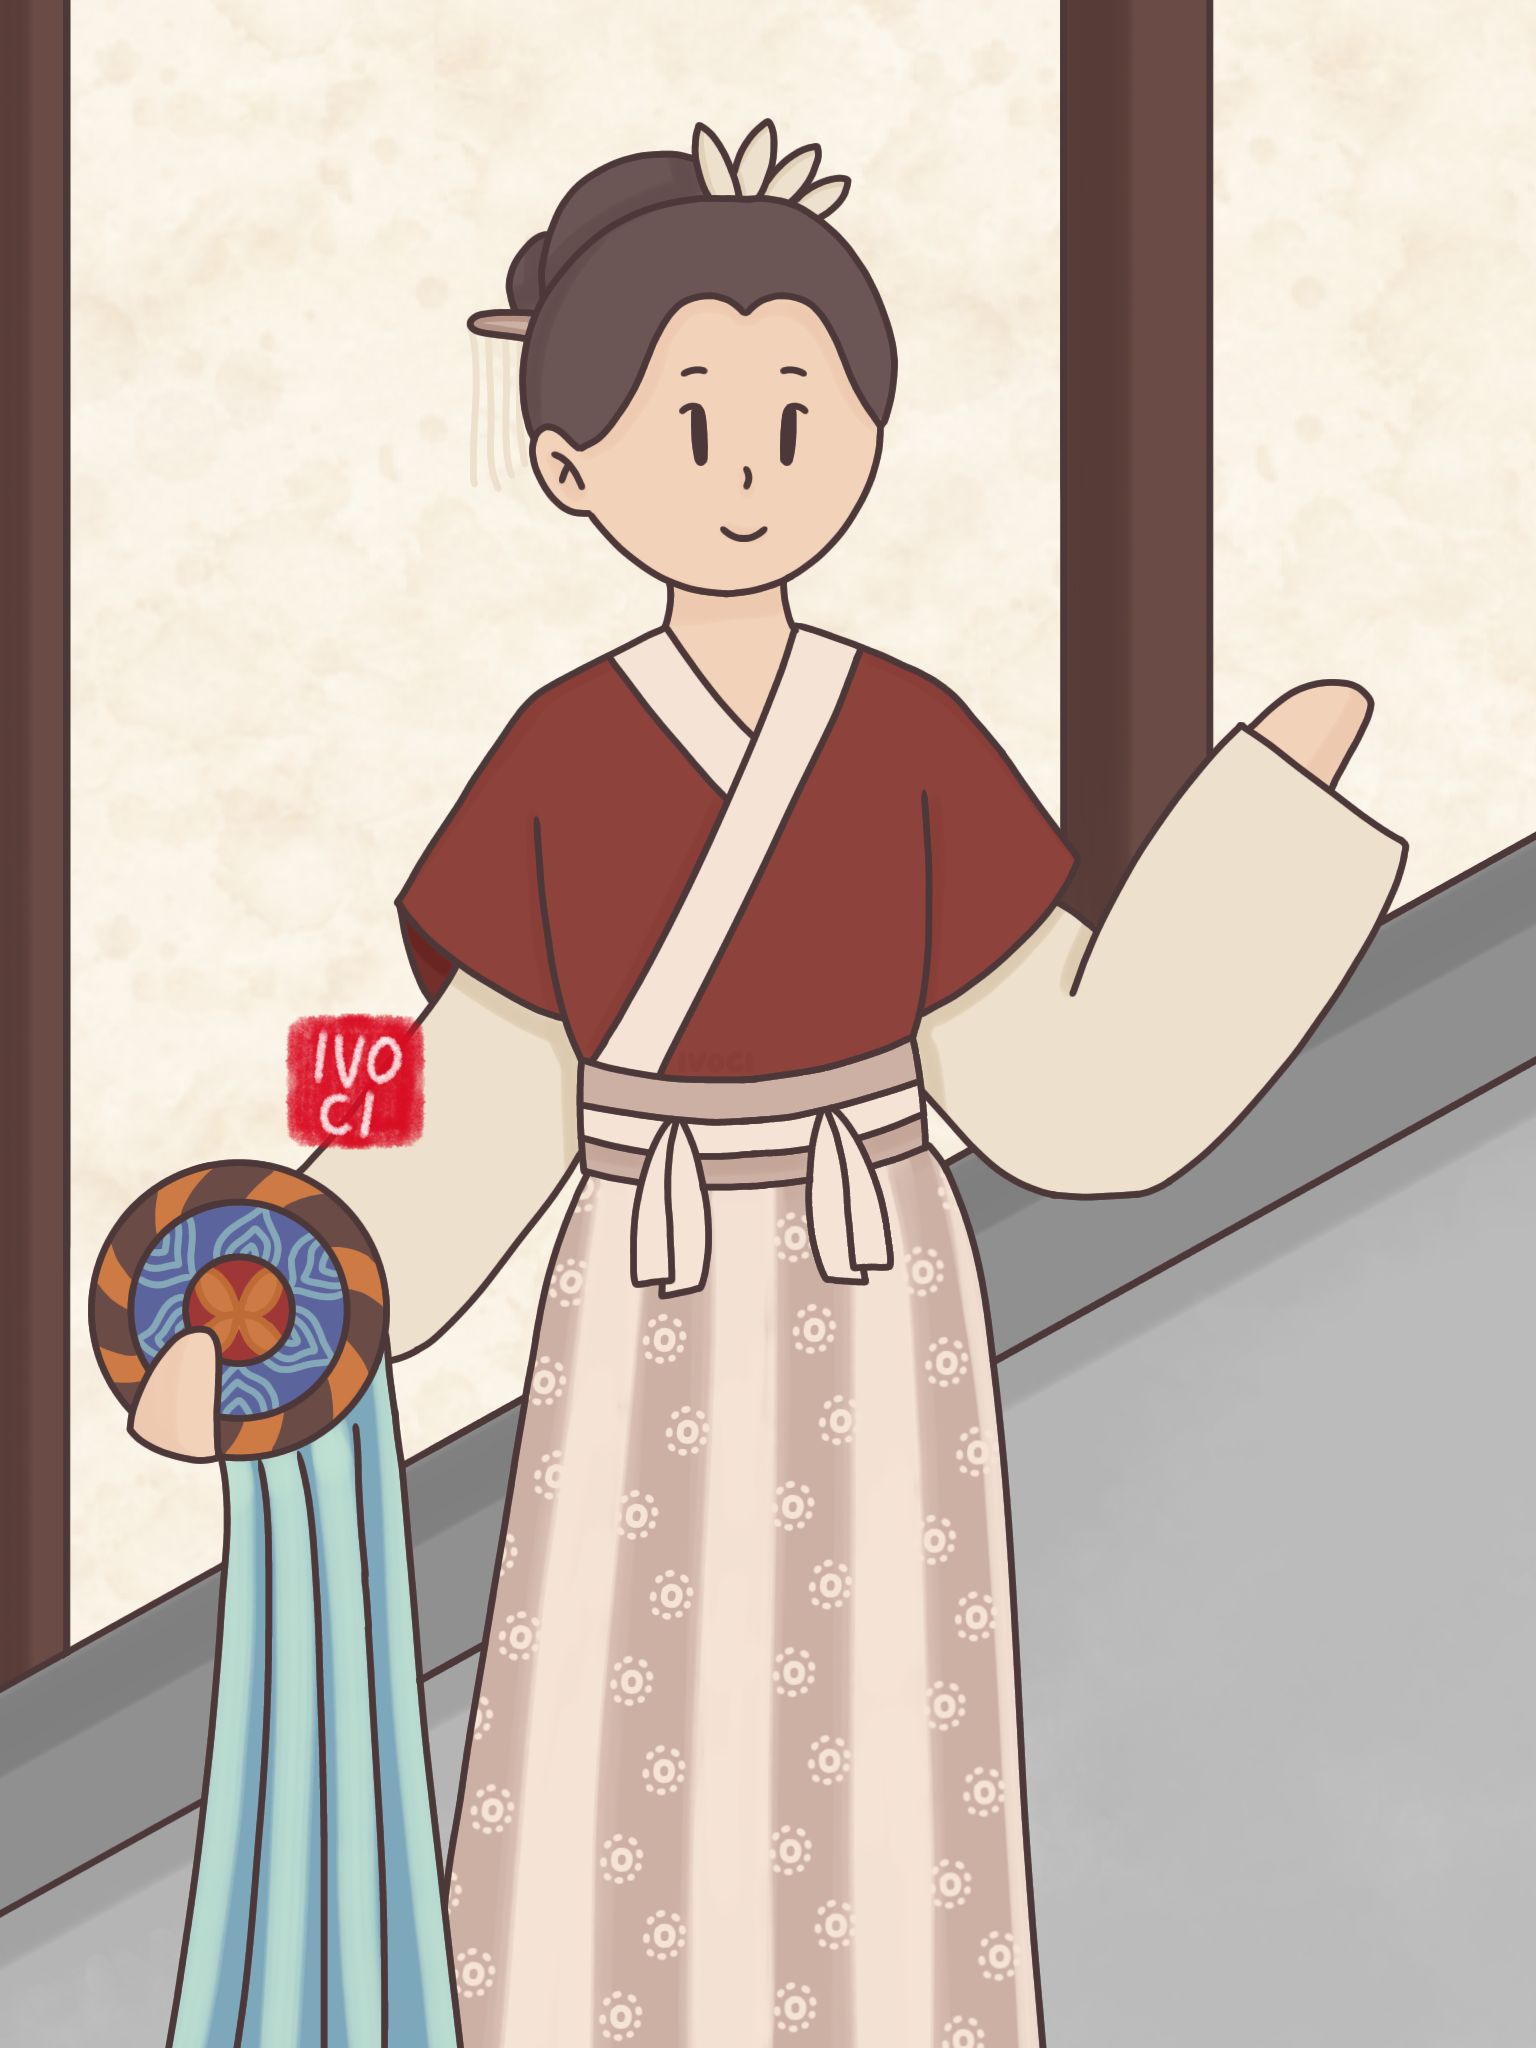 ivoci - Types of Hanfu Skirts & Their Differences - 1